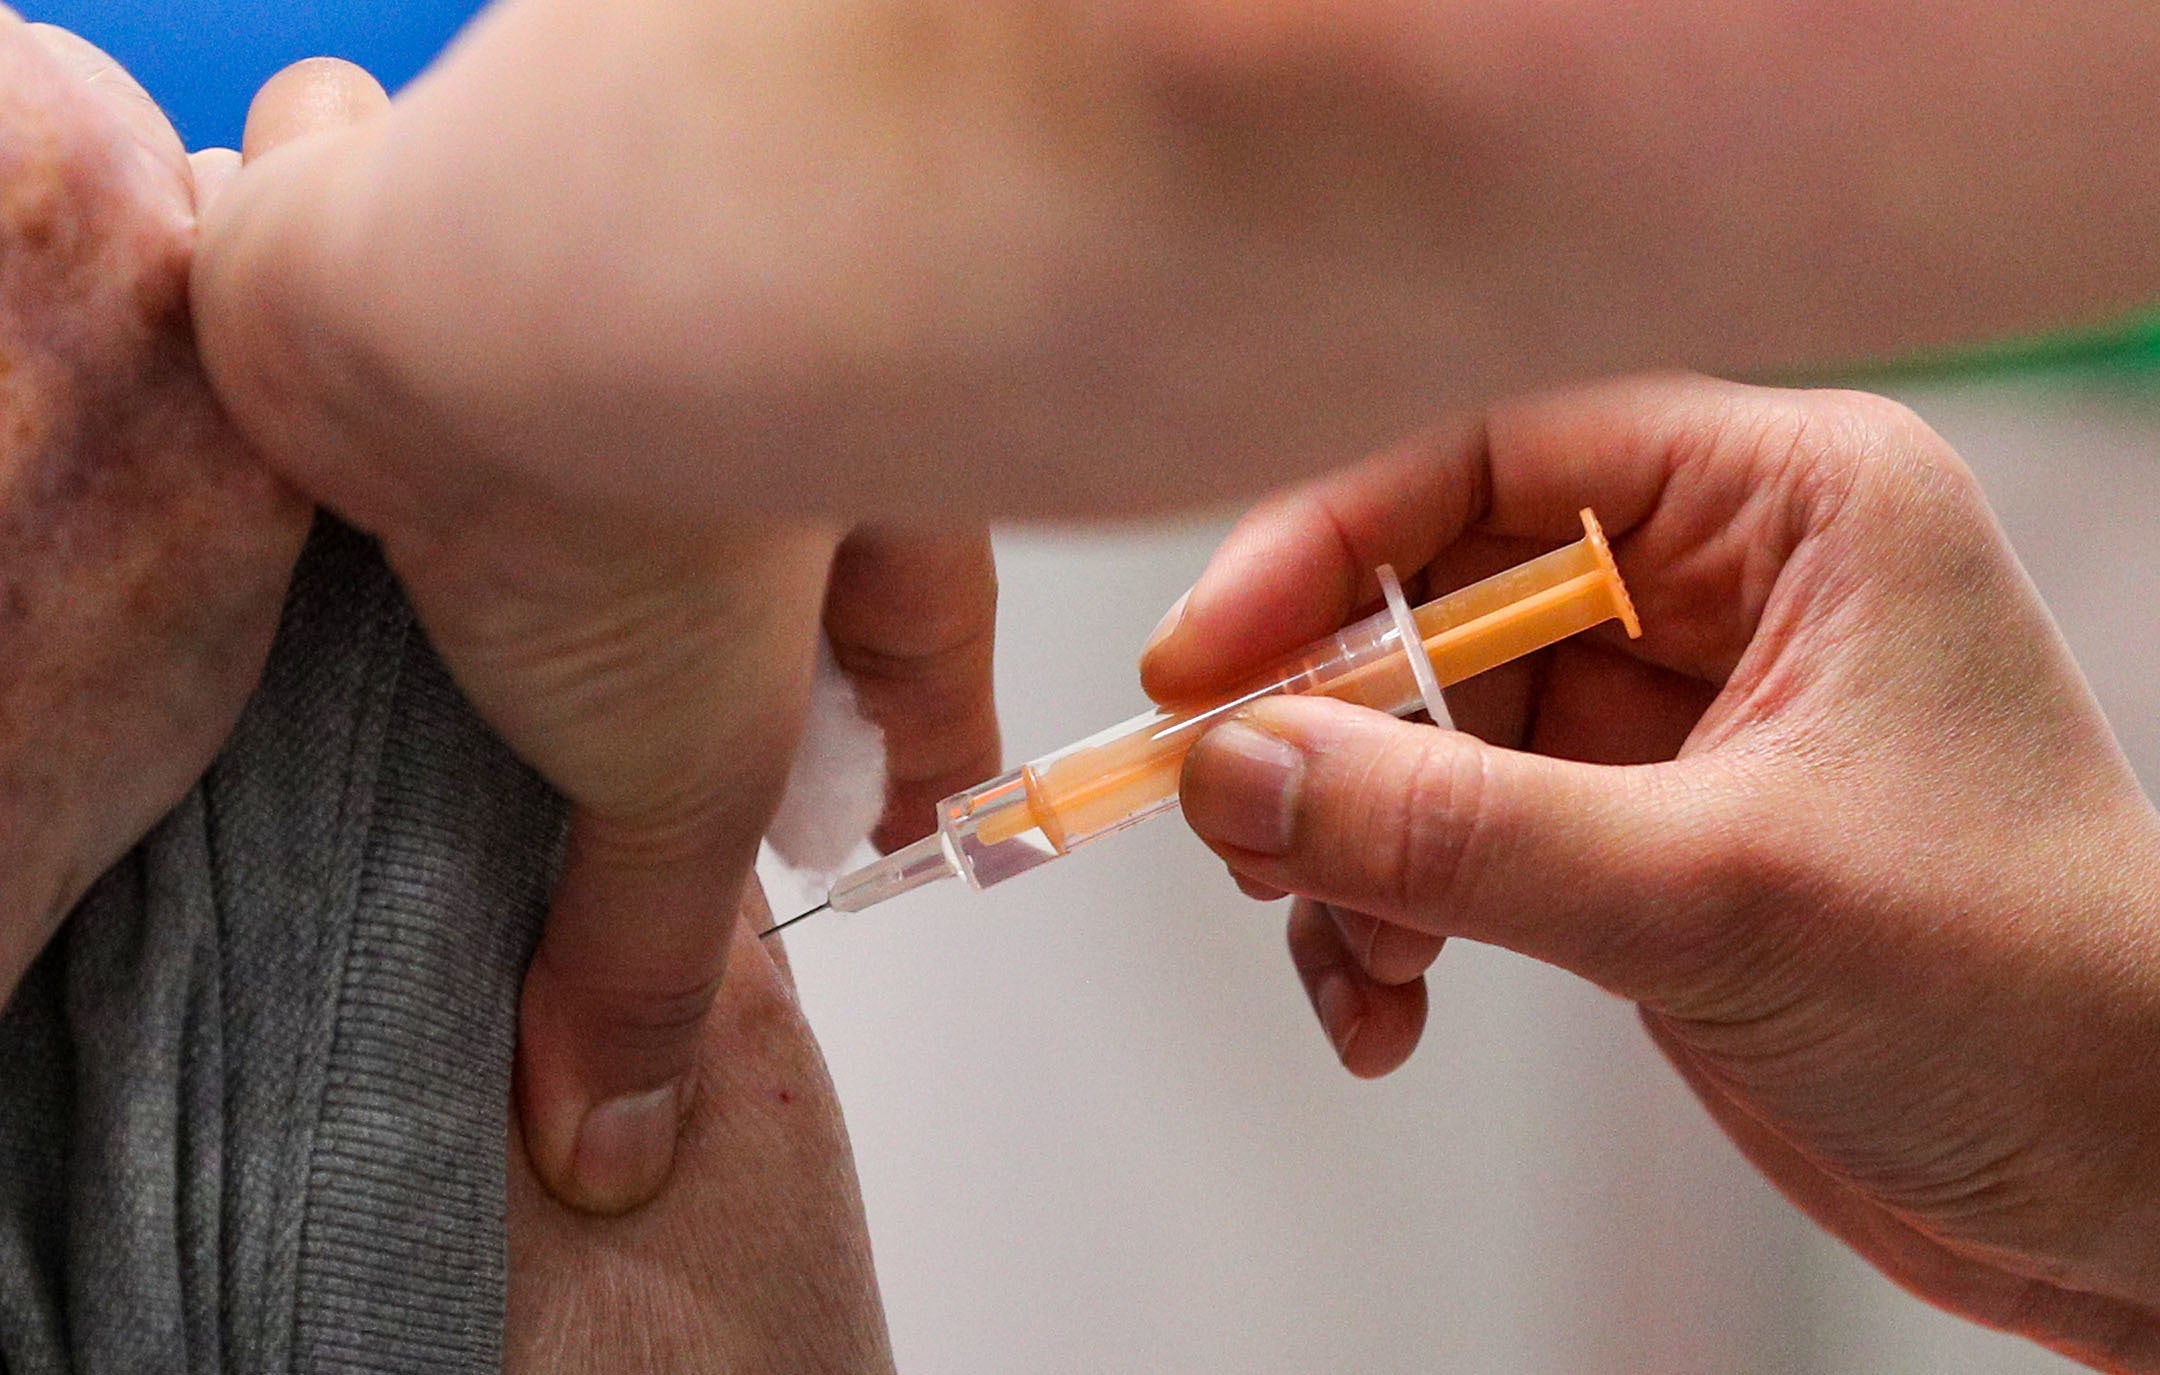 A patient is given a coronavirus vaccine